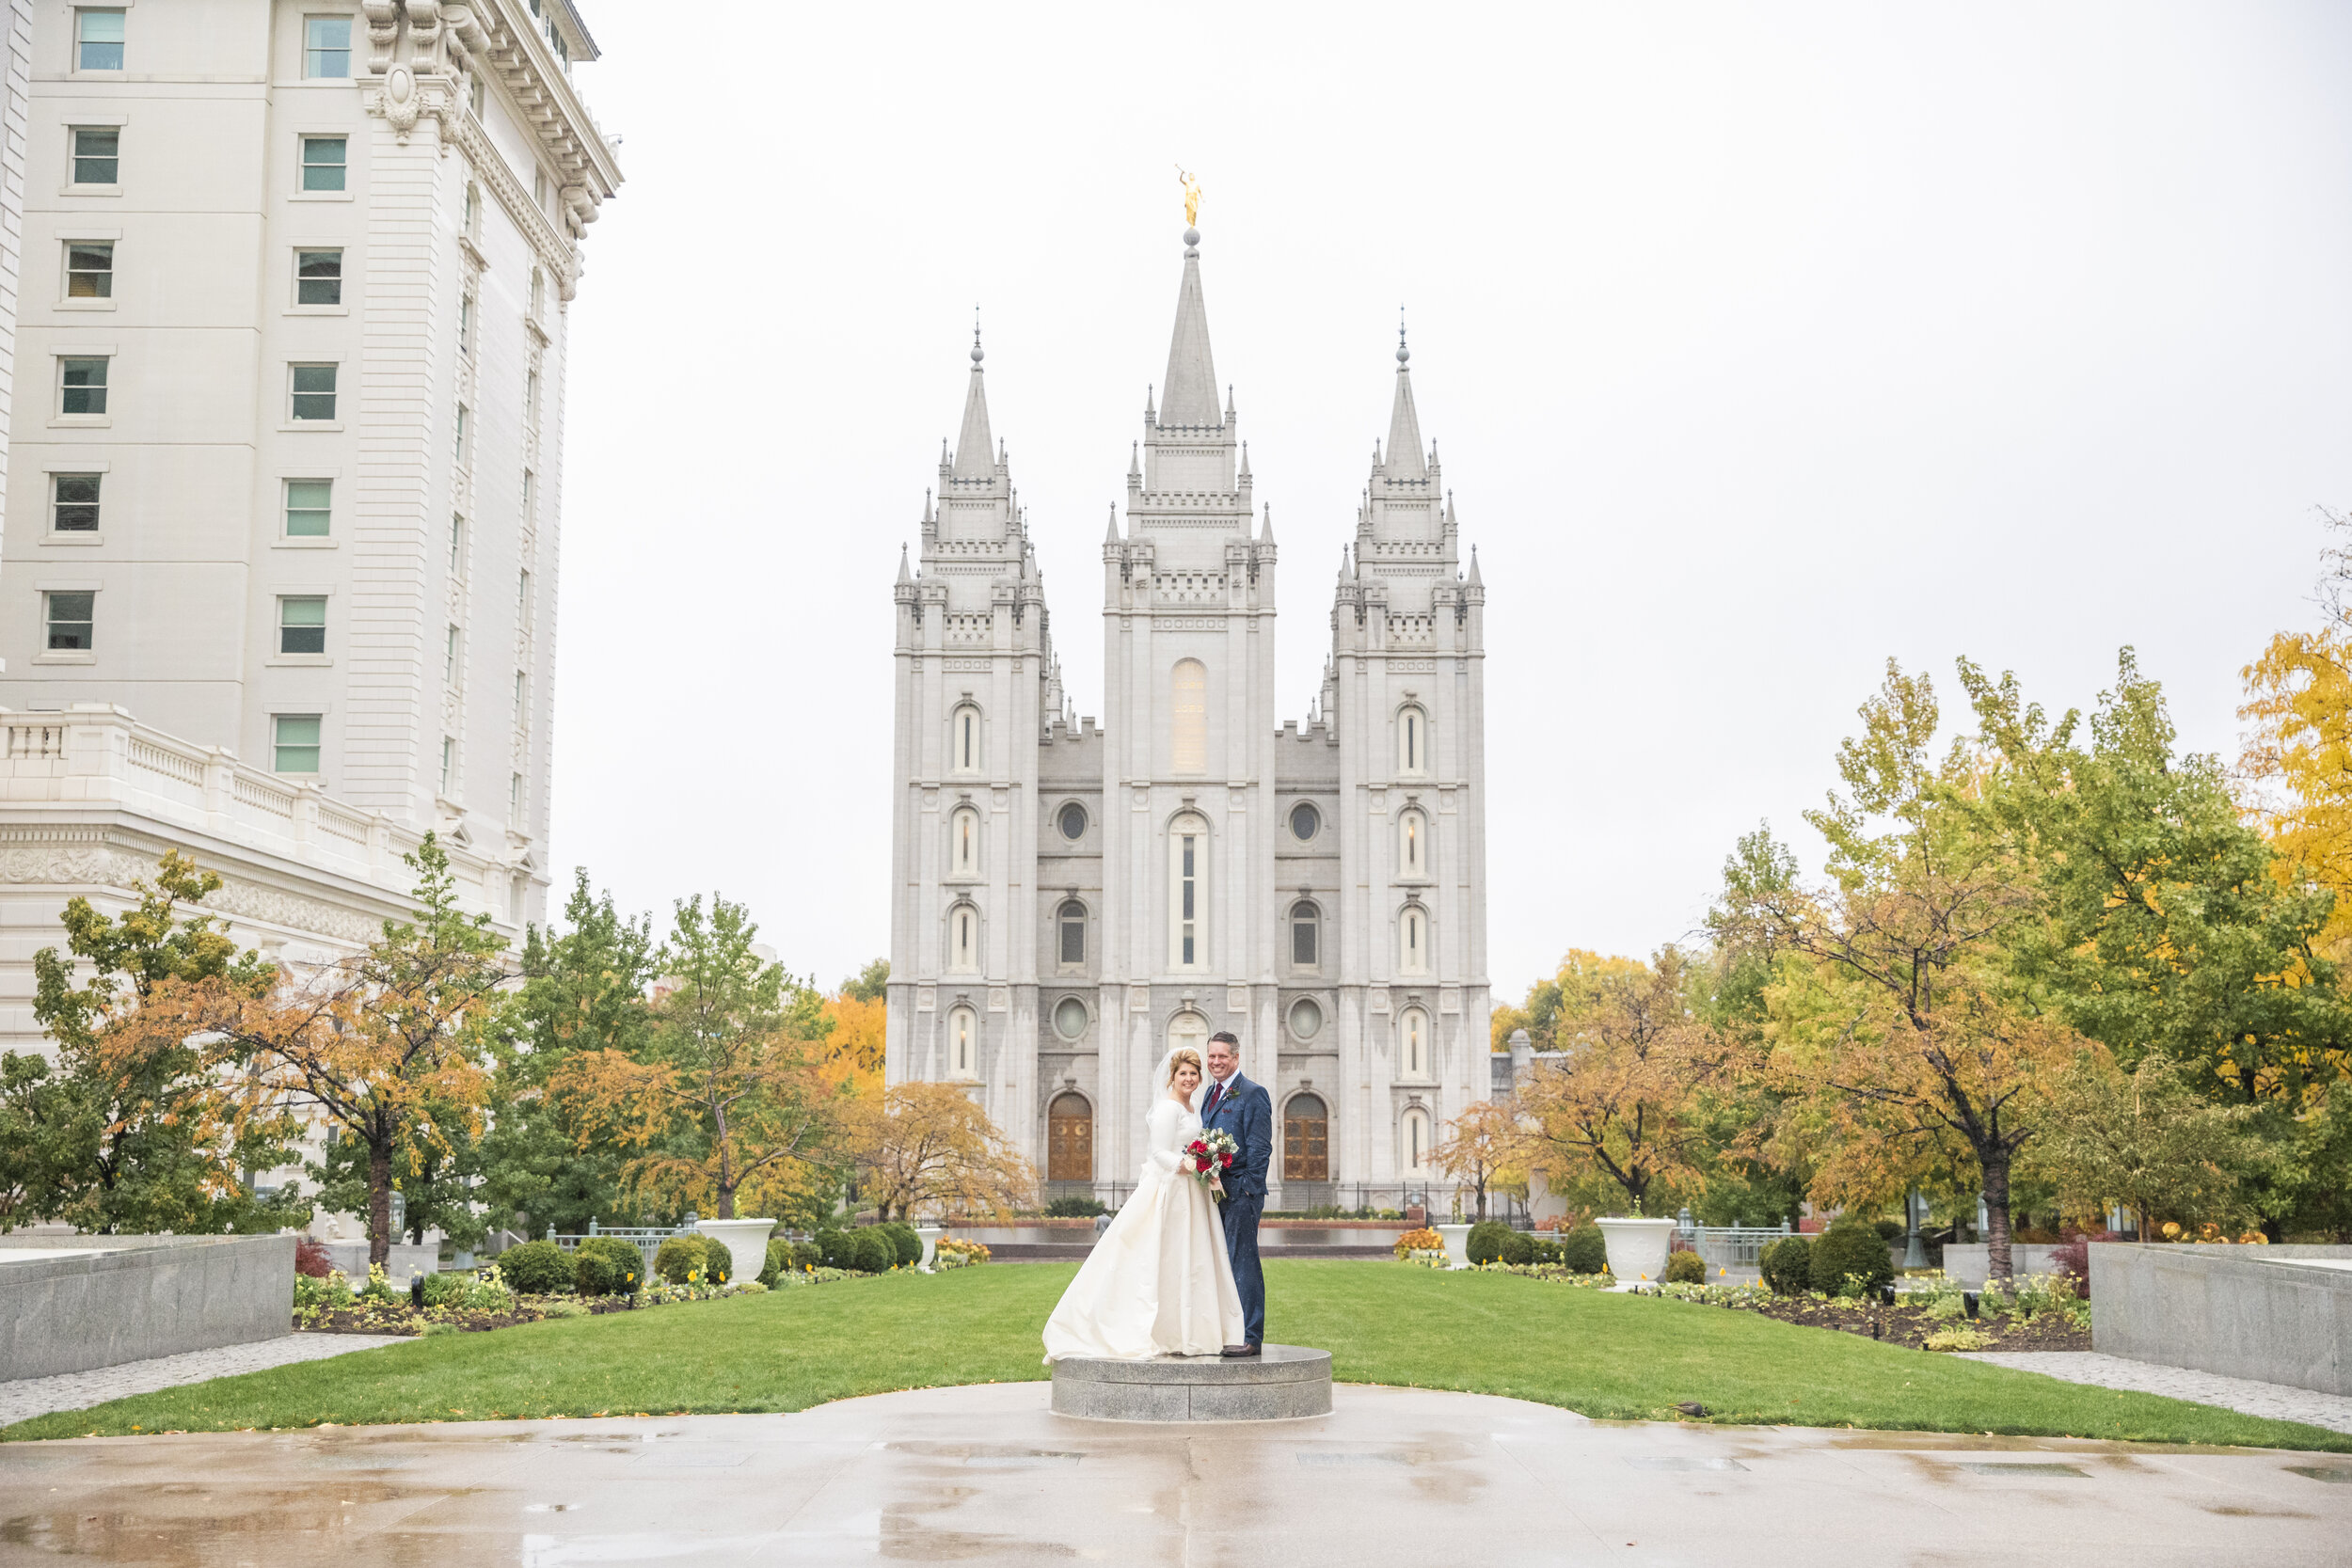  temple square salt lake city lds temple holiness to the lord yellow fall trees rainy wedding day just married sealed full ballgown modest wedding dress holding hands hugging smiling professional utah valley wedding photographer #saltlakeldstemple #s